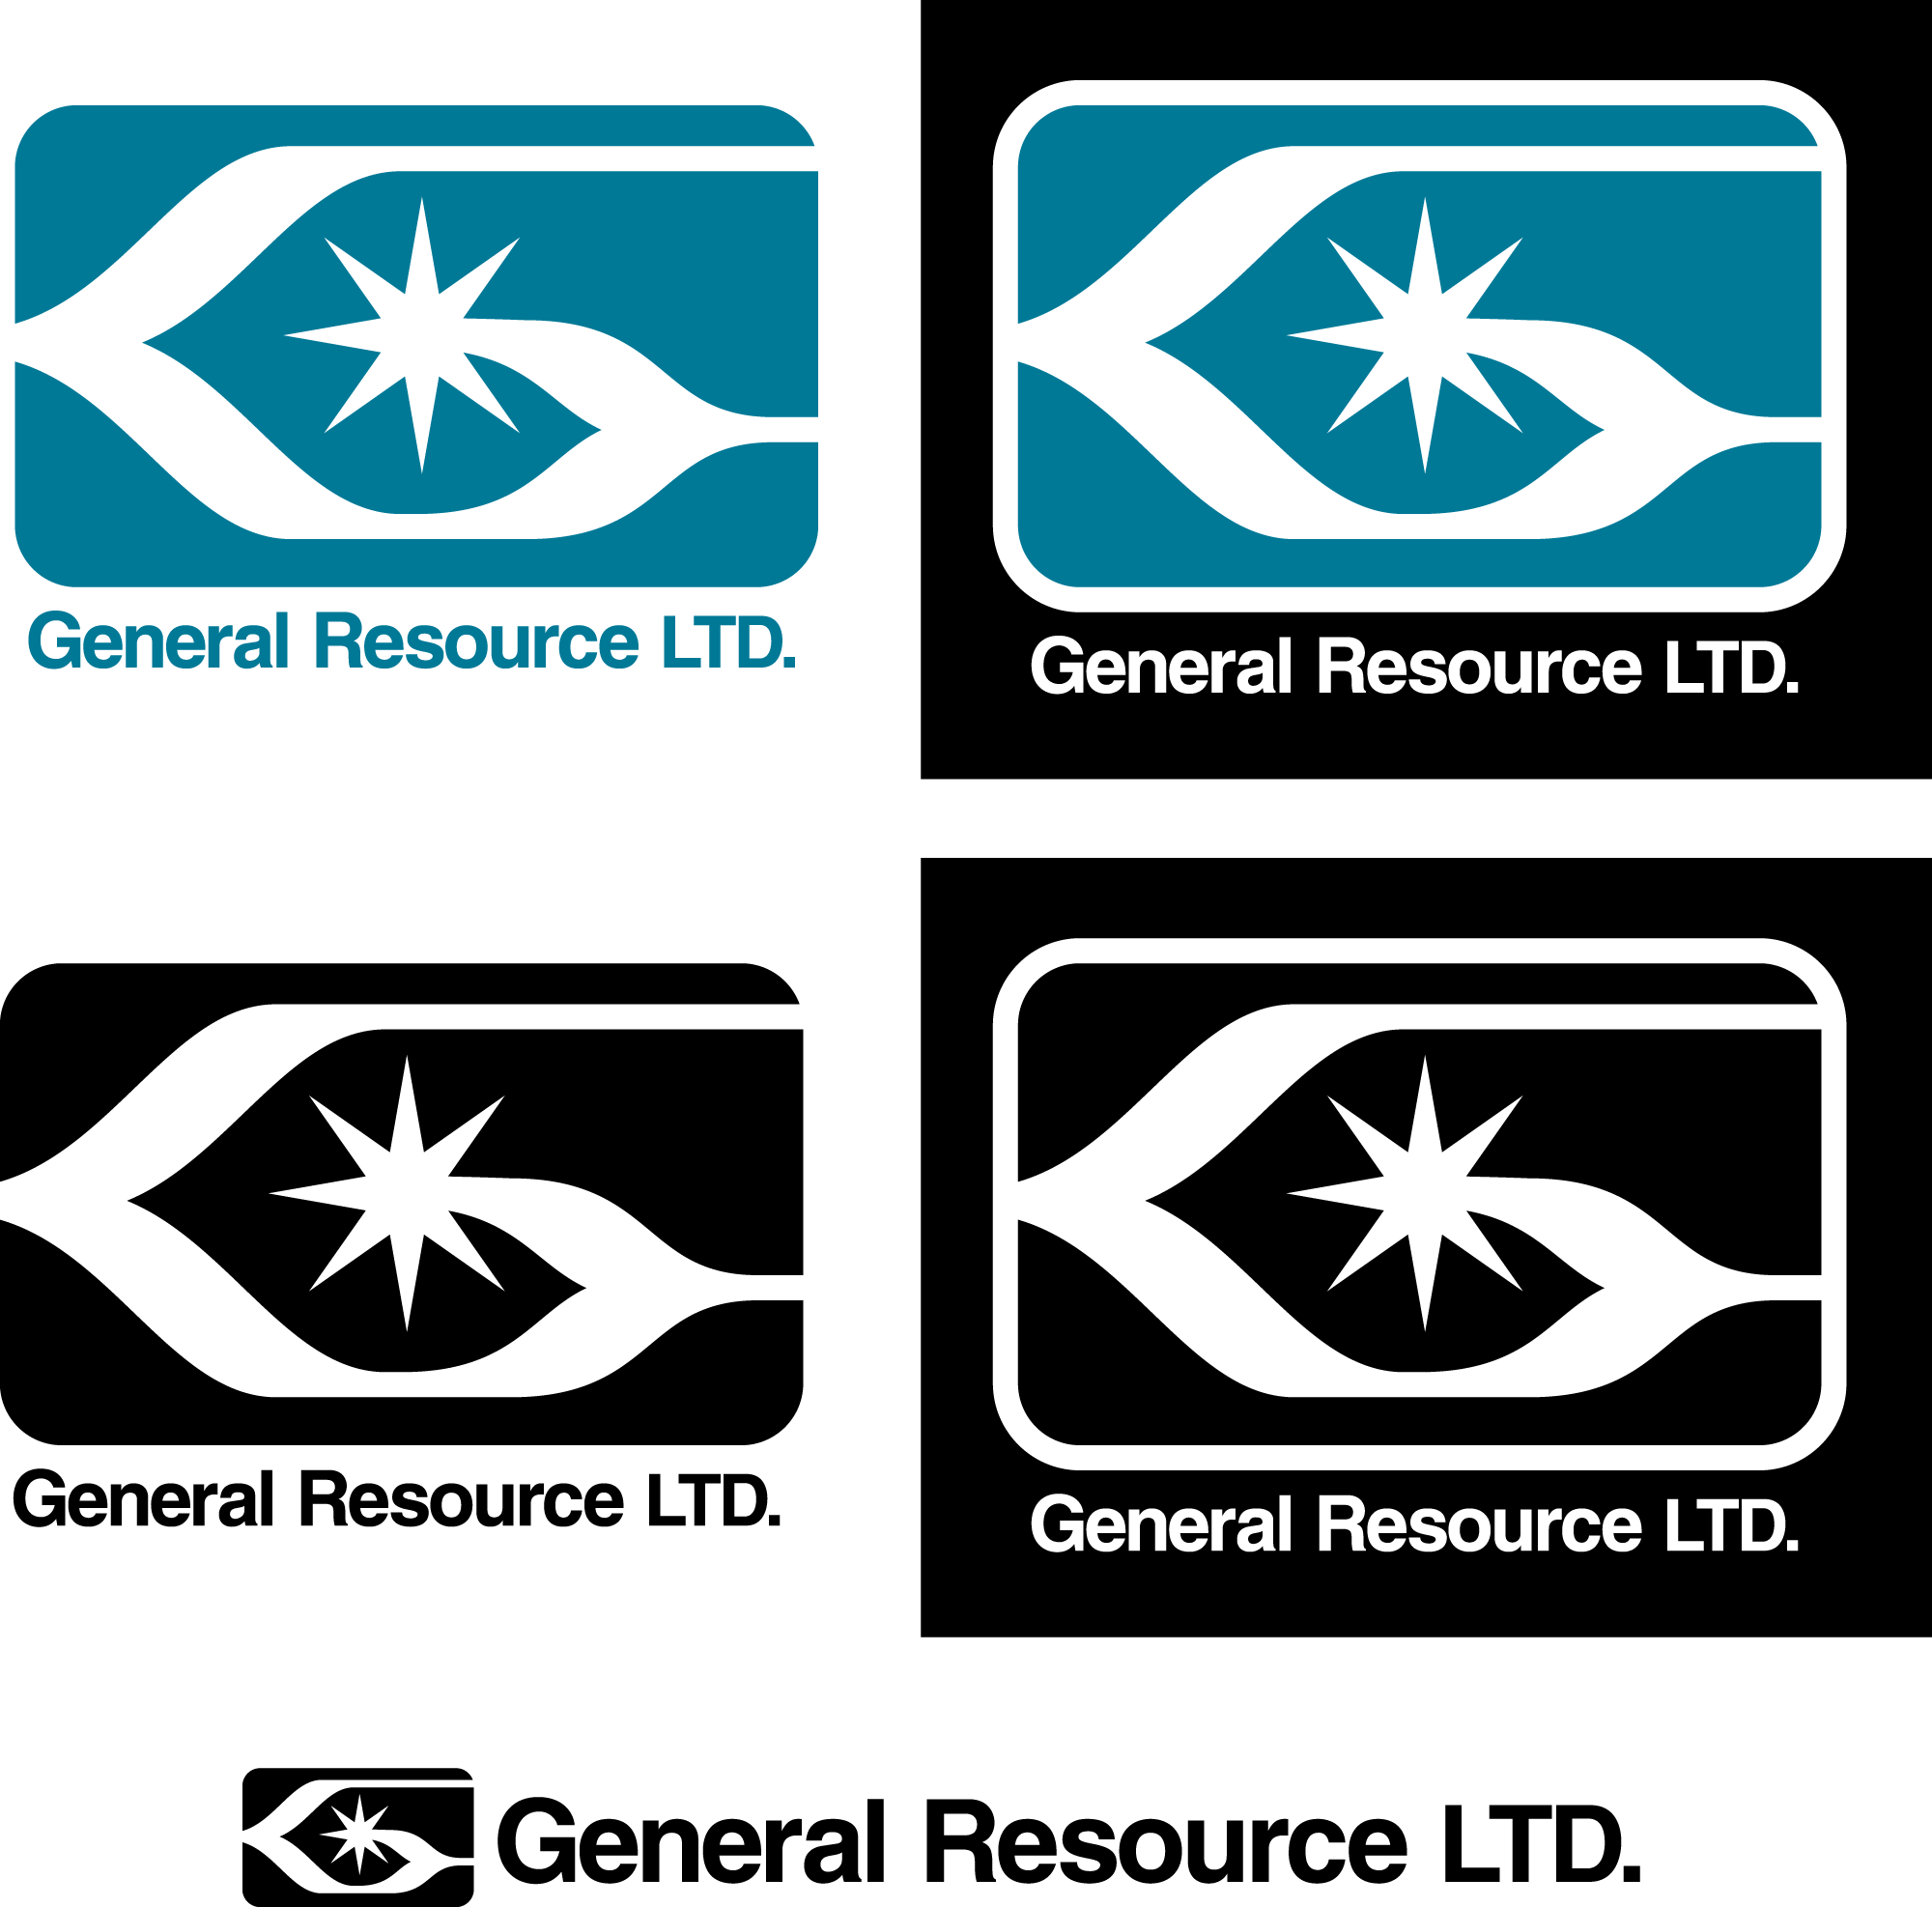 General Resource logo from Ace Combat 3